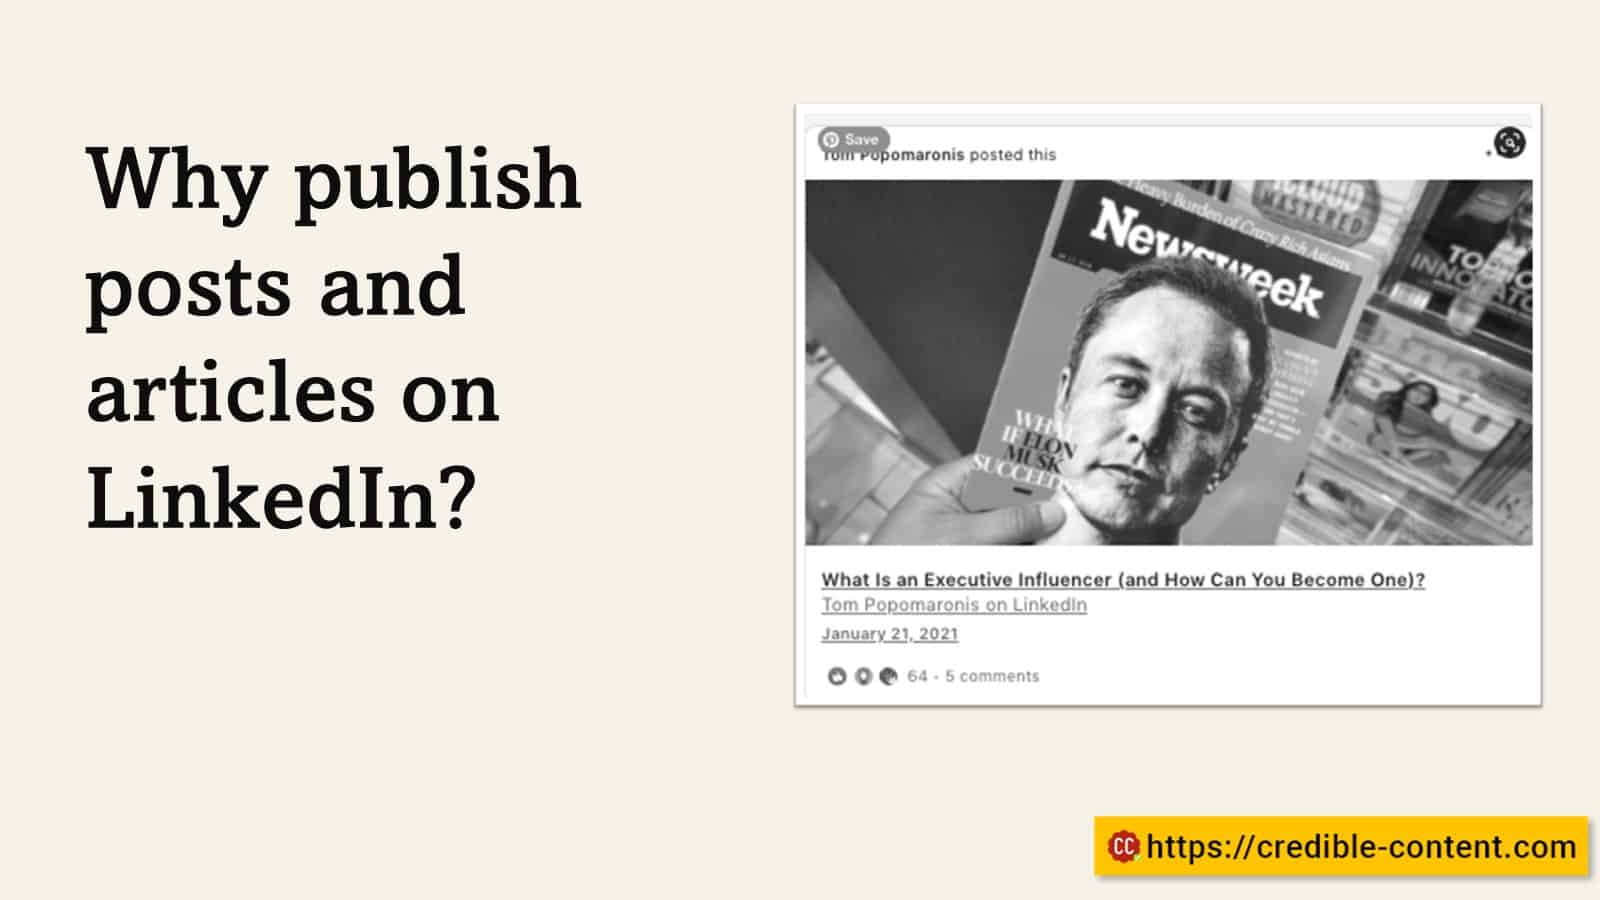 Why publish posts and articles on LinkedIn